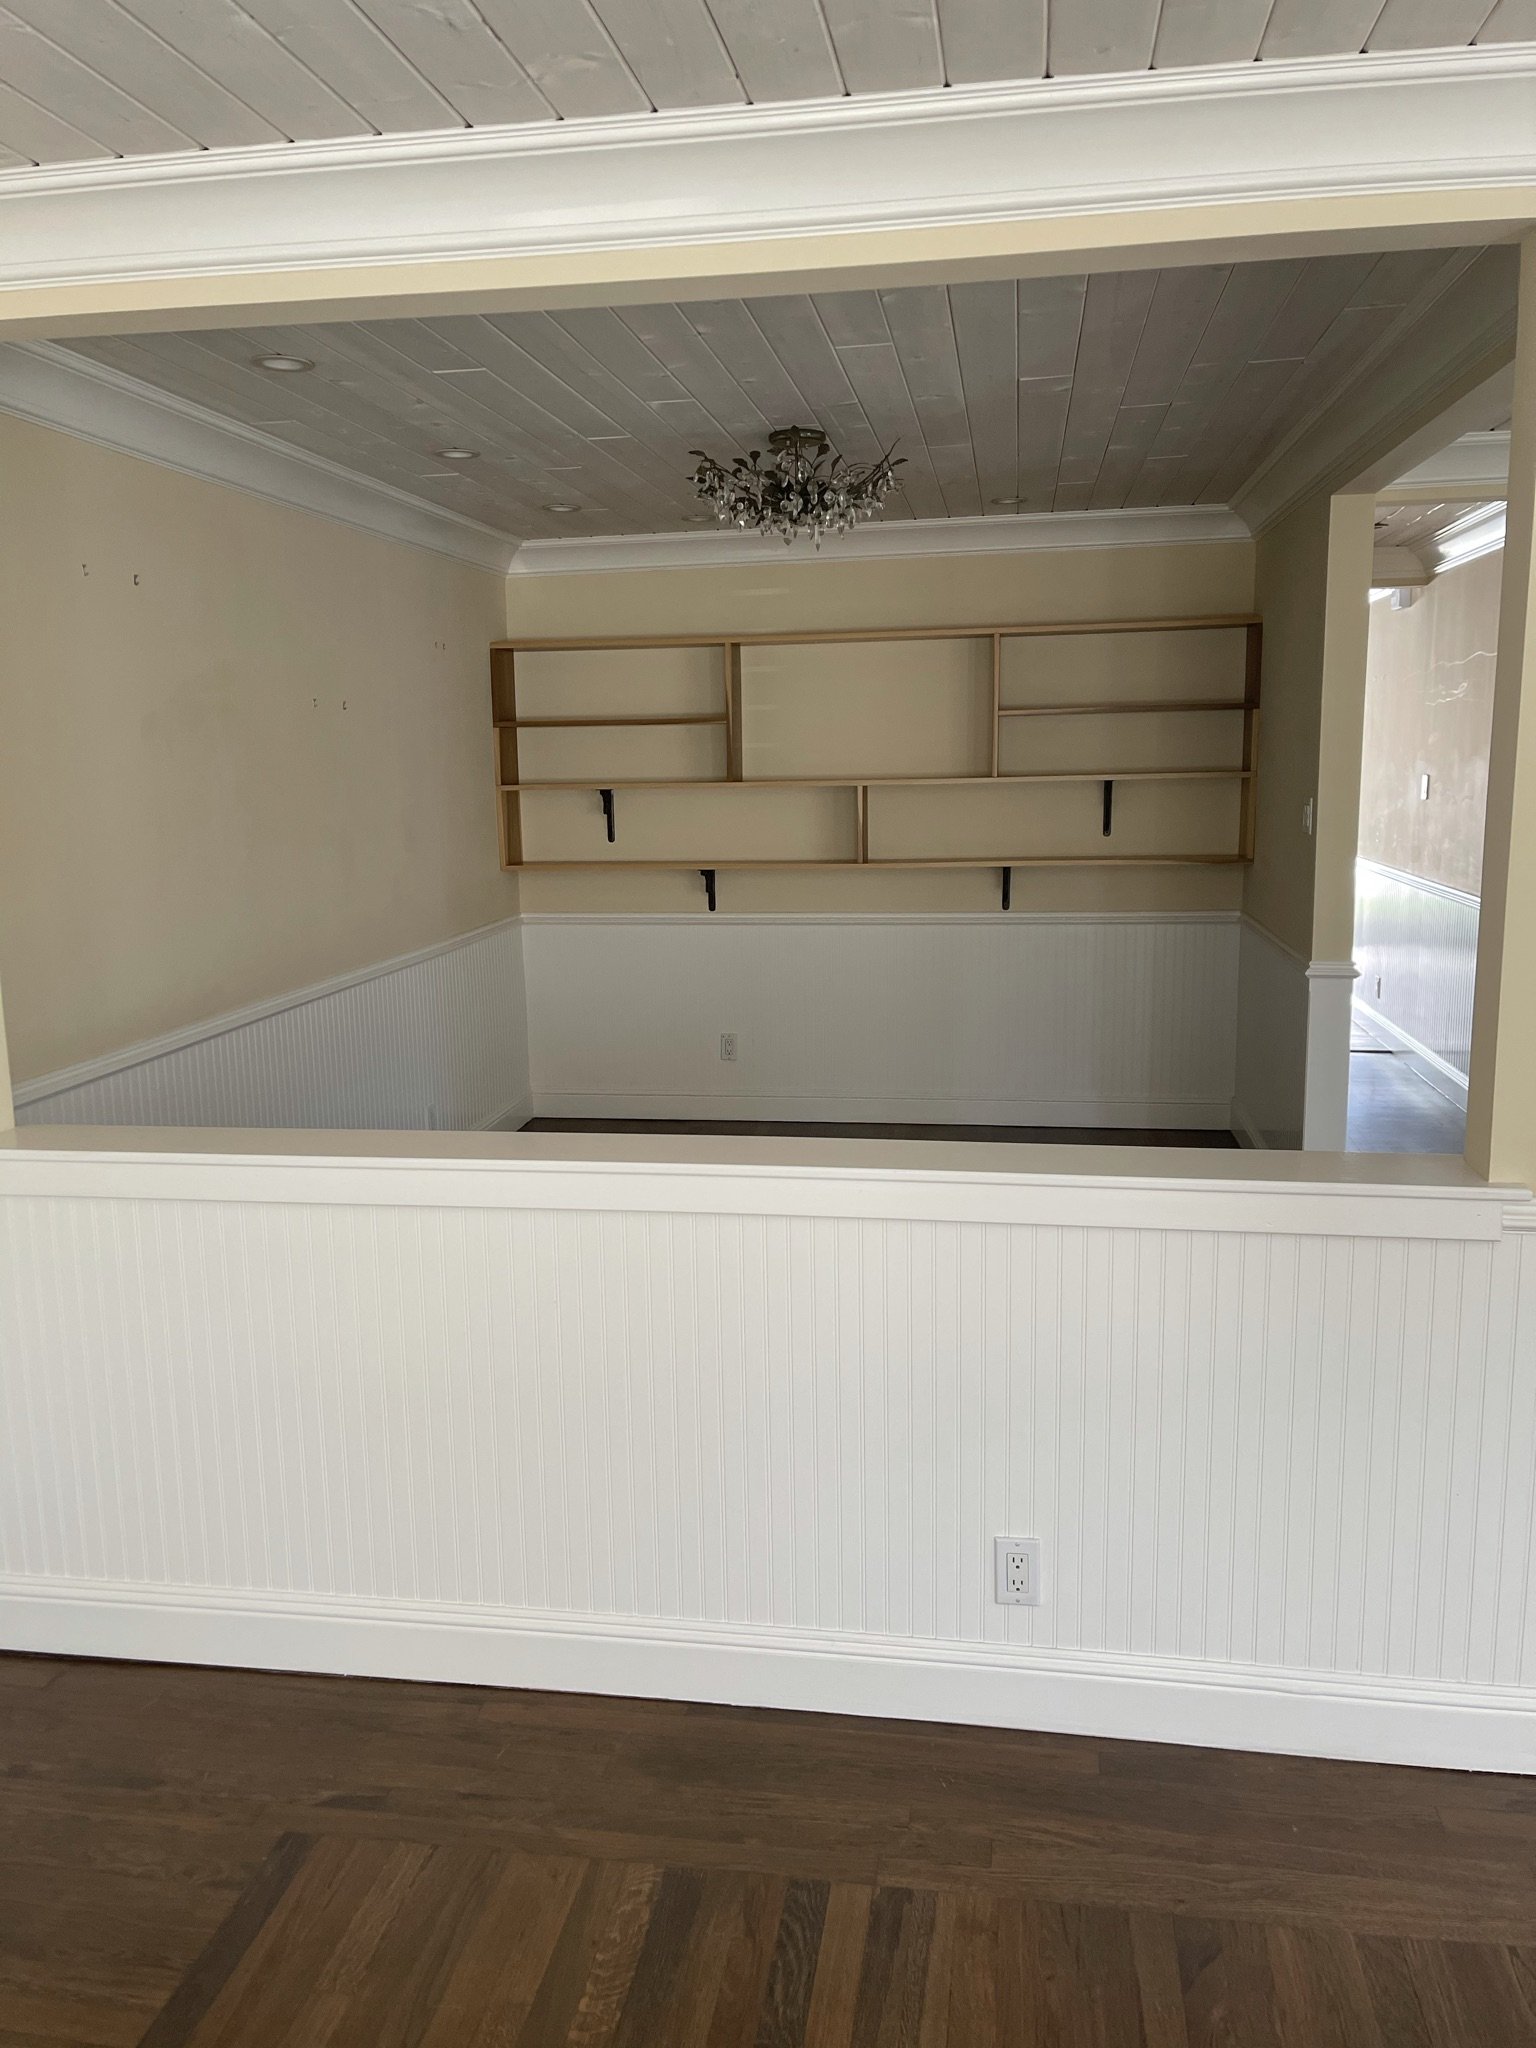  A before image of a living space separated by a low half wall. Beyond the half wall is a small space with a shelving unit on the wall.  